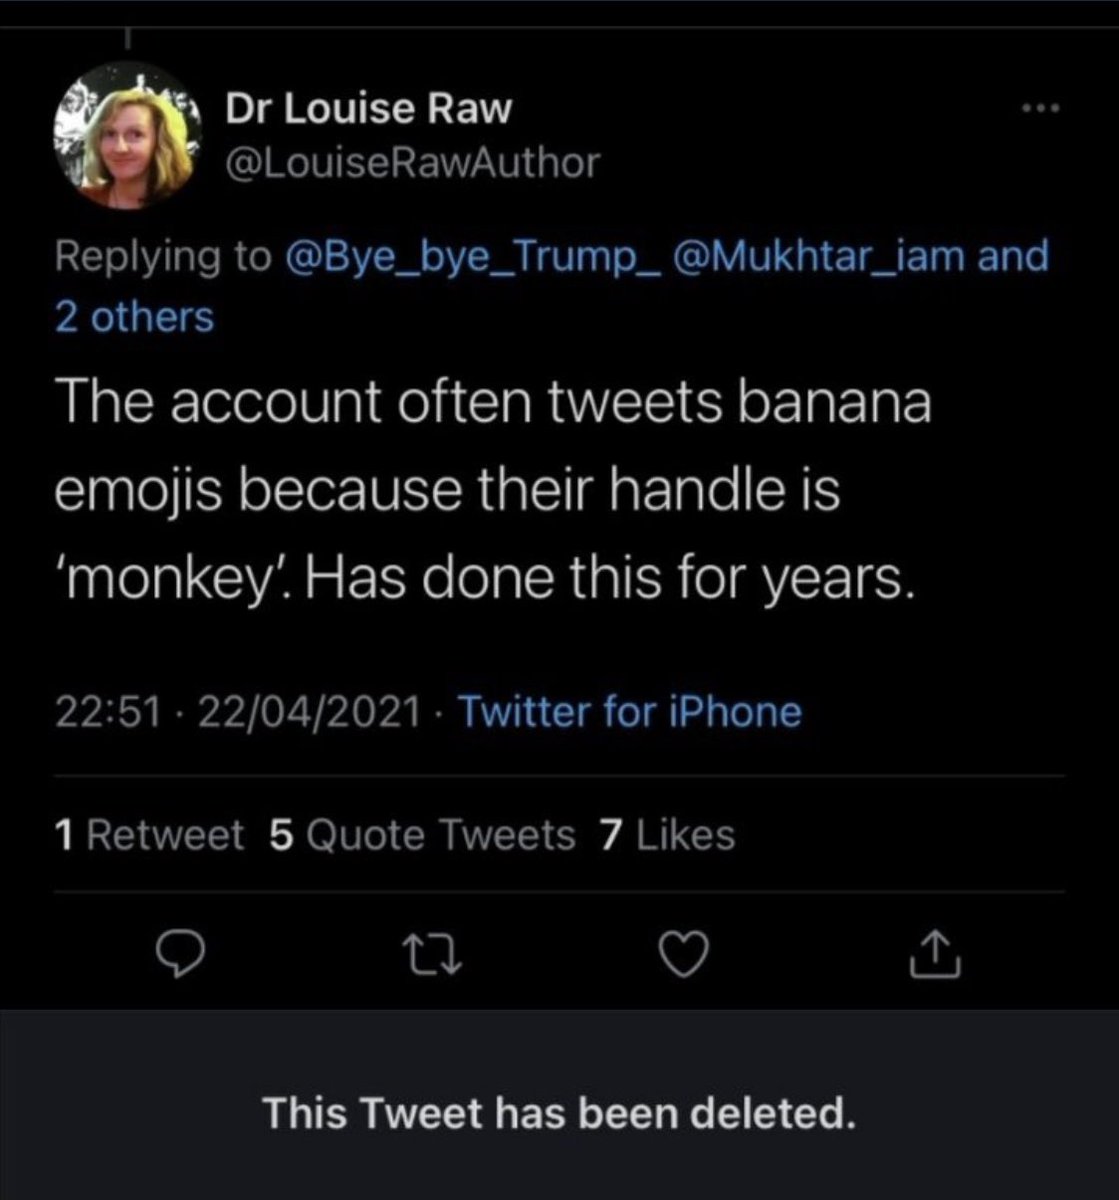 4:‘was trying to be even handed-perhaps foolishly, when feelings are running so high’ (her words) by posting the following now deleted tweet: